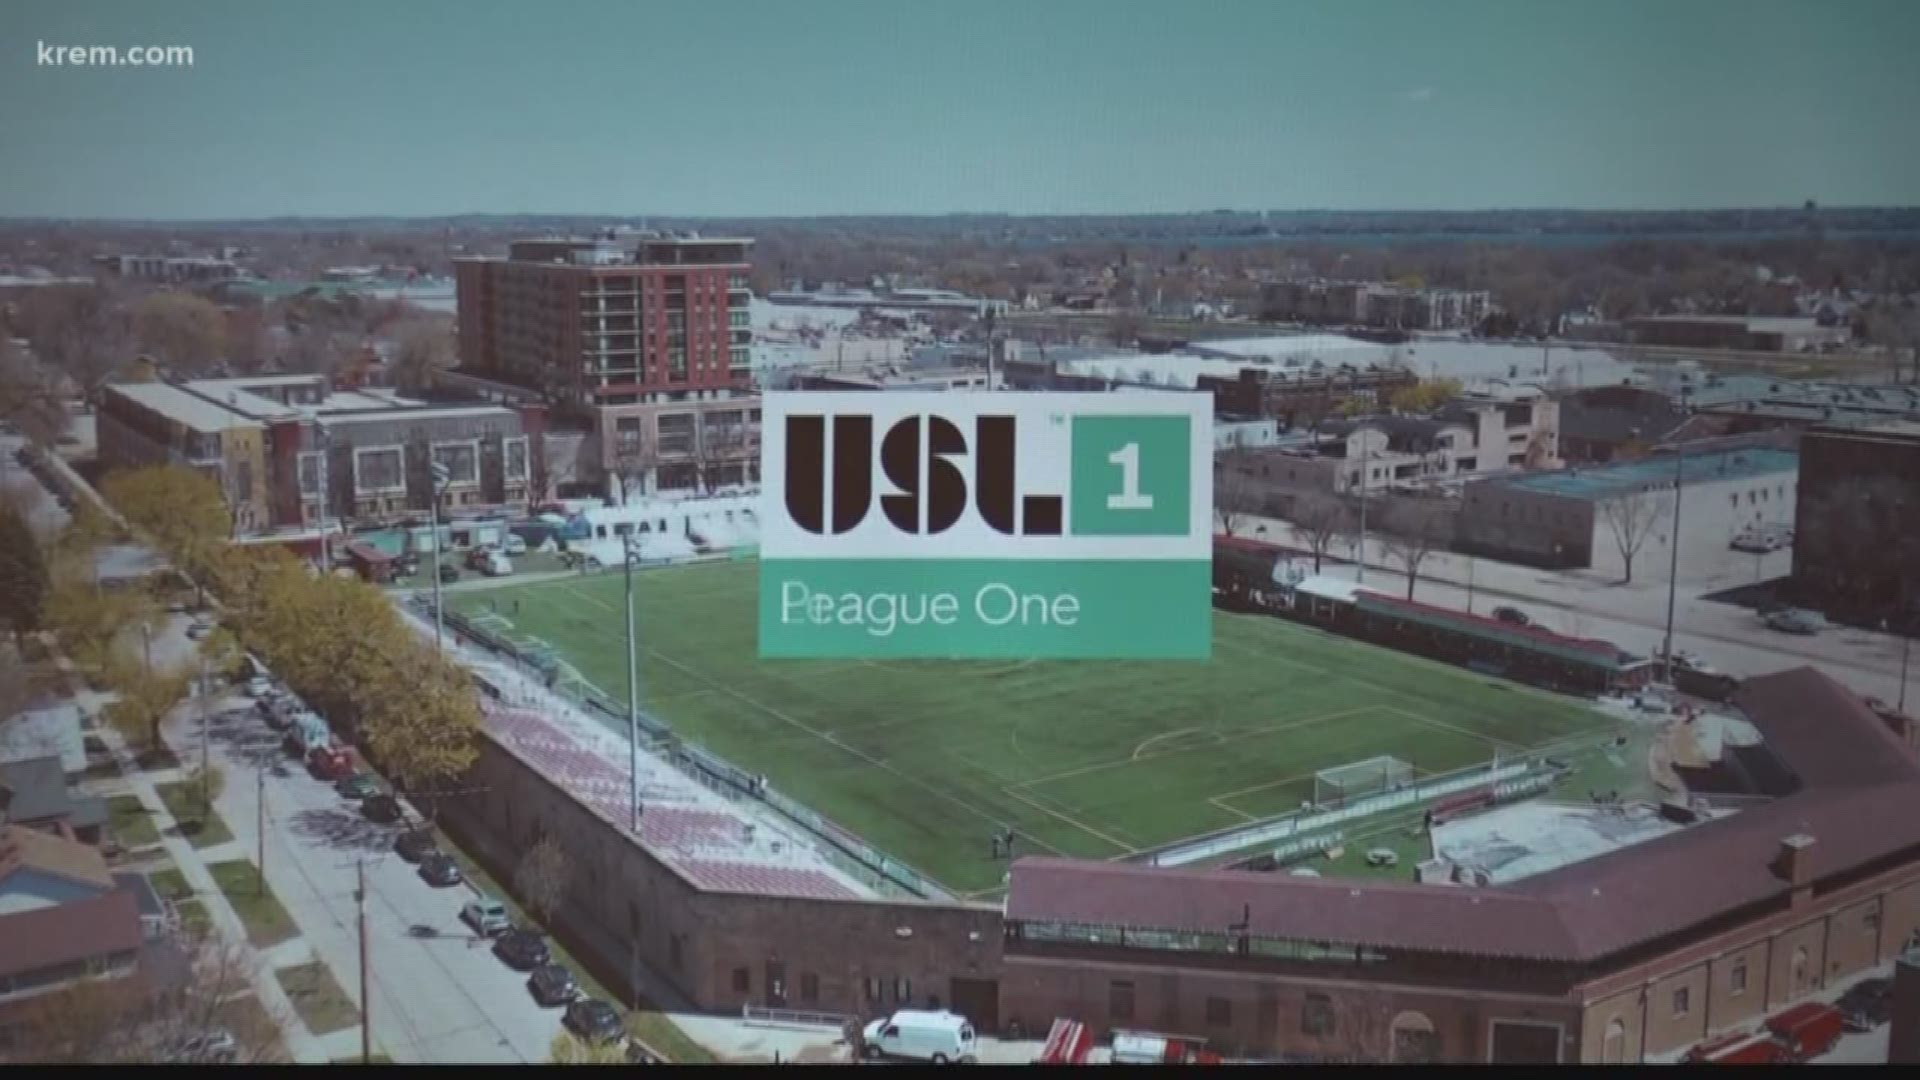 The United Soccer League co-held a press conference discussing the possibilities of using a downtown stadium.